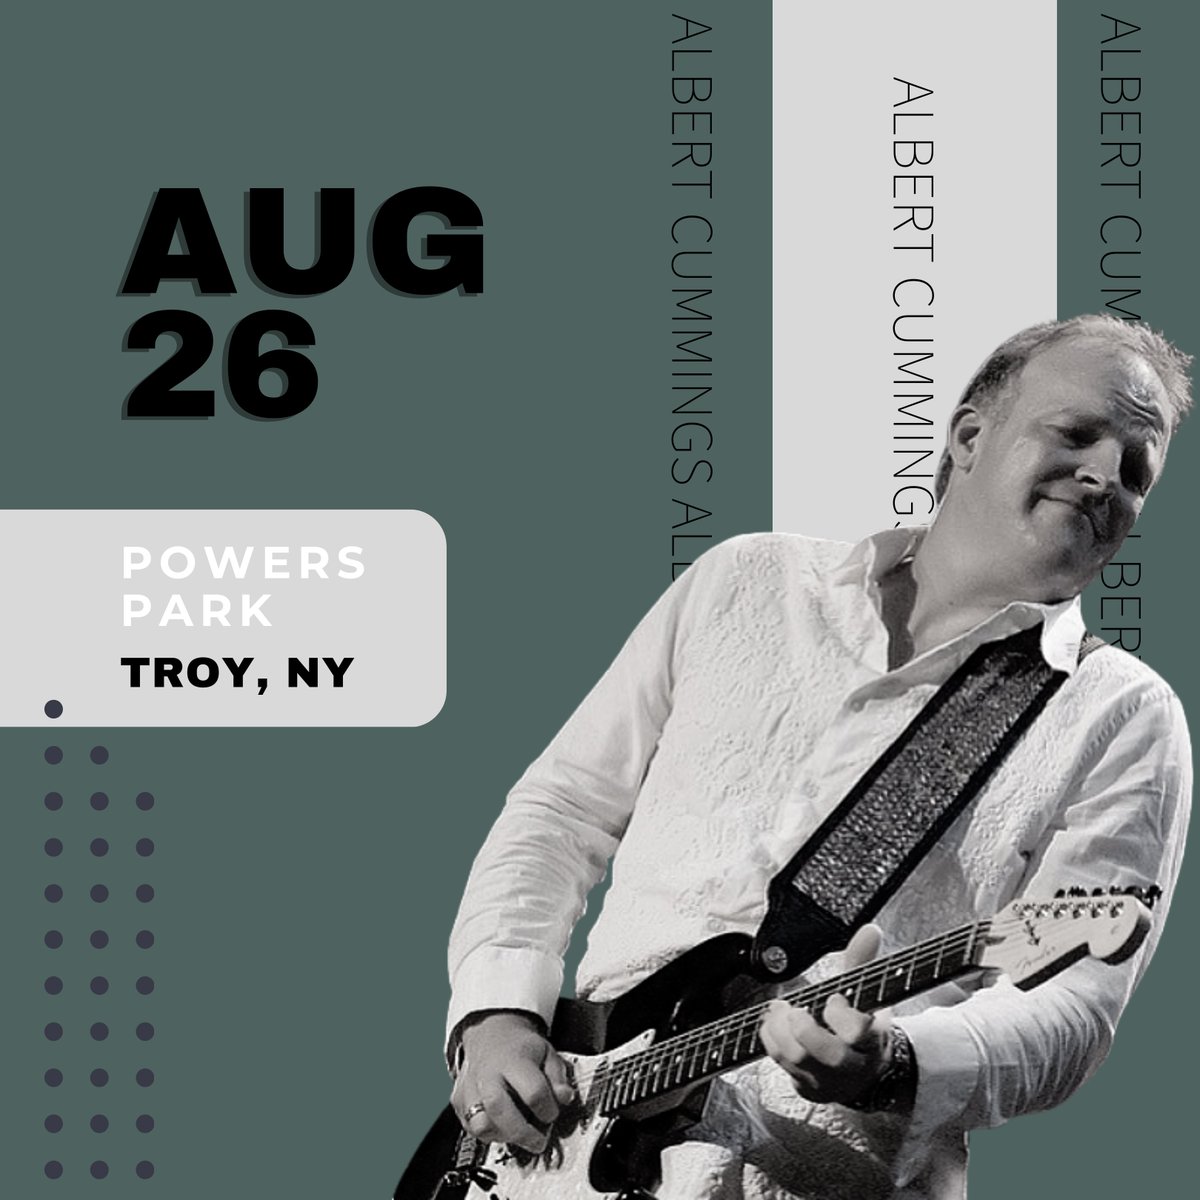 Is it the weekend yet??? Counting down the days to this Saturday when I'll be playing a FREE show at Powers Park in Troy, NY. Come on out and close out the summer with me!
.
#stratocaster #dunlop #ontheroad #summer #summerconcert